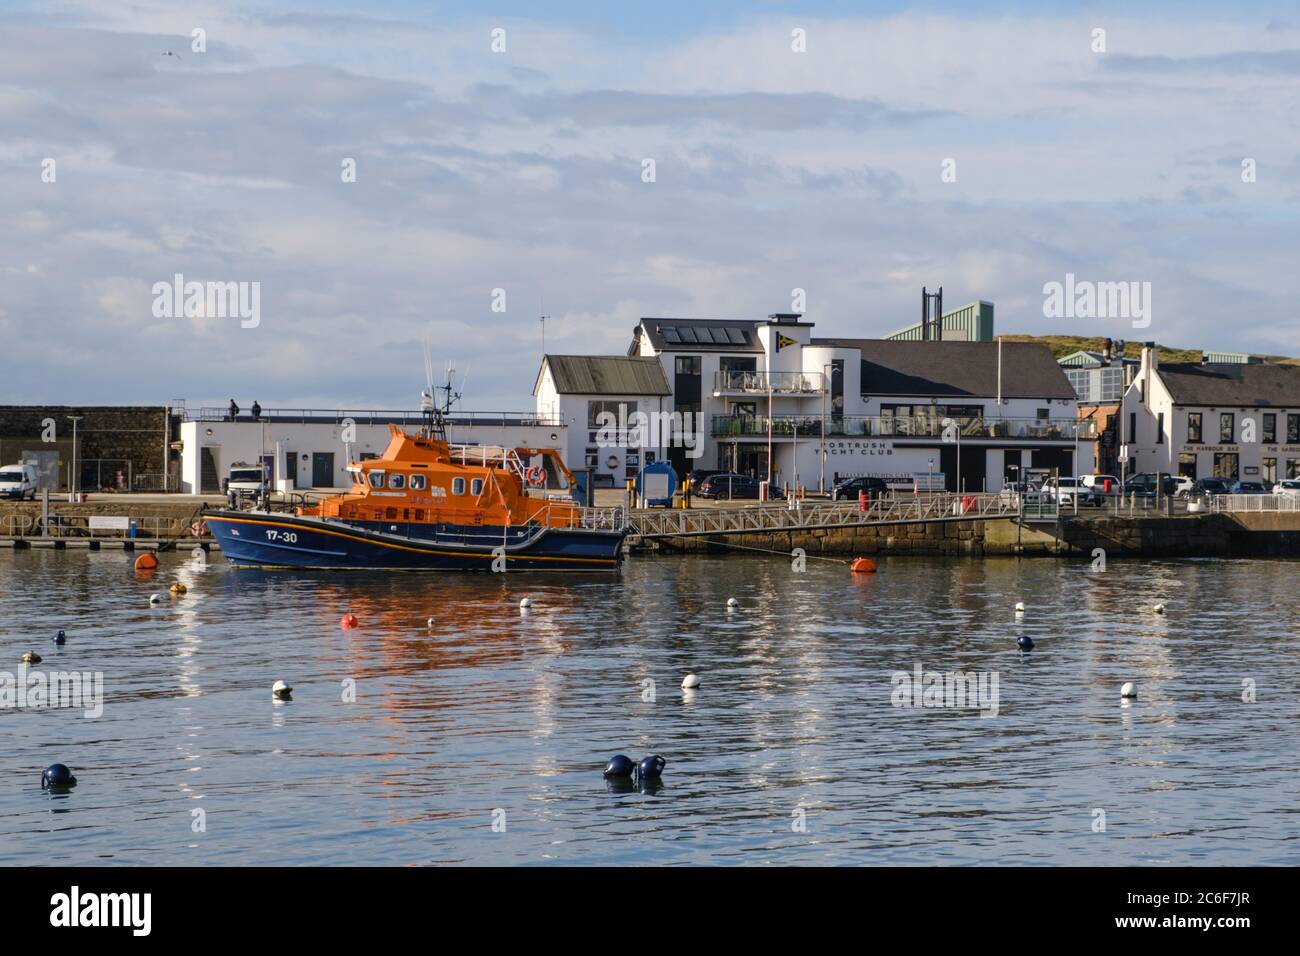 RNLI Lifeboat in Portrush Harbour. In background, Portrush Yacht Club. Stock Photo